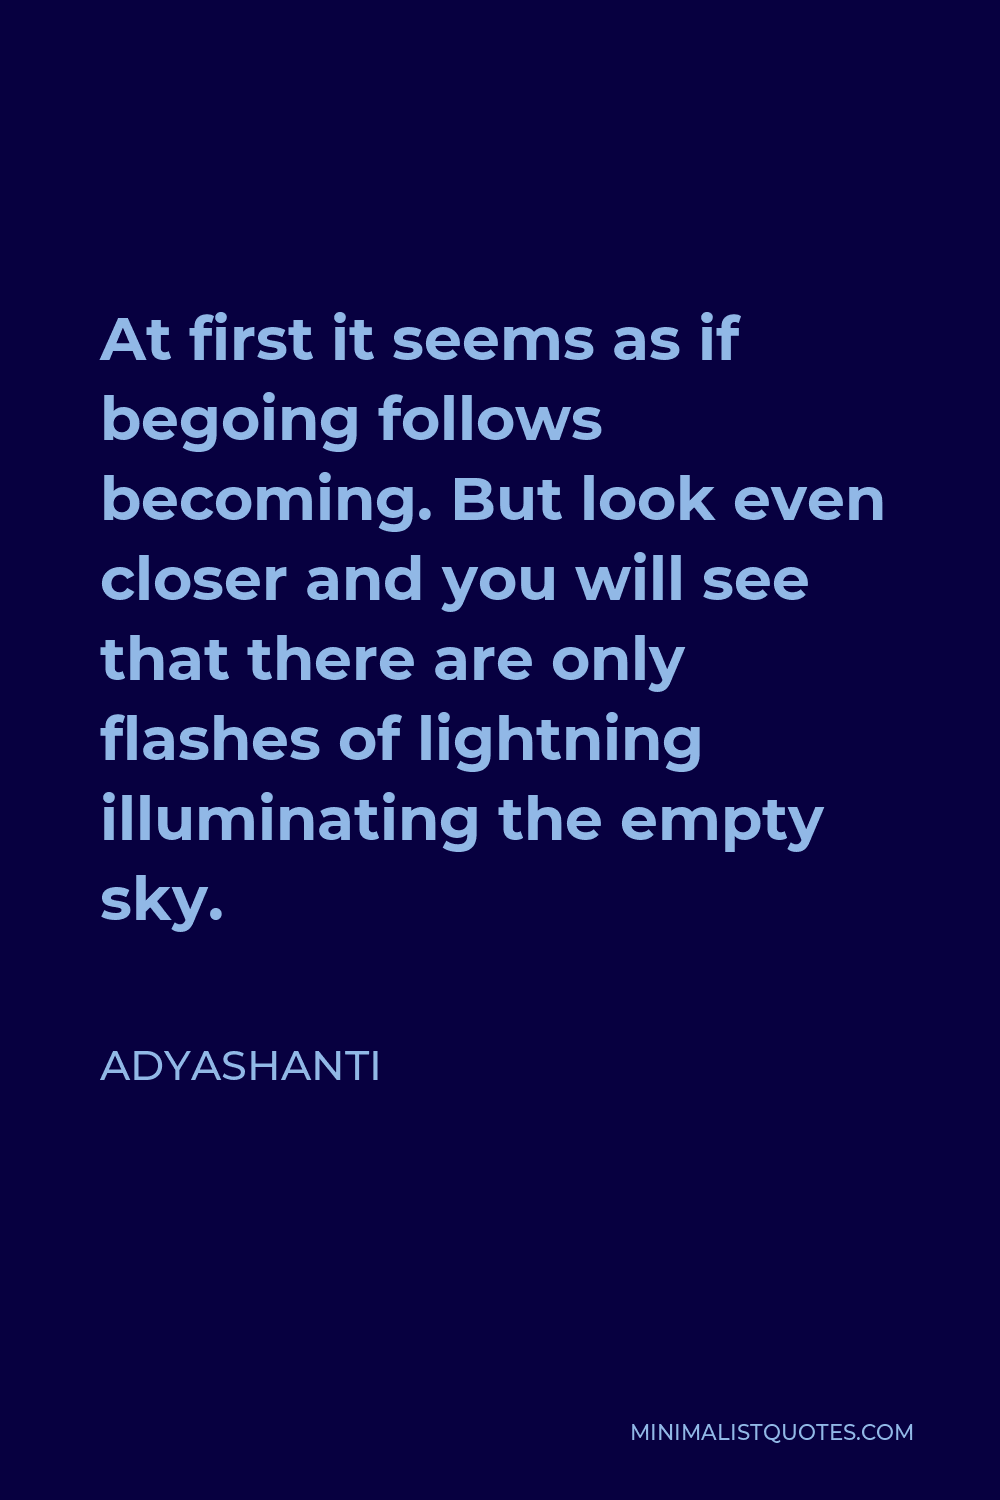 Adyashanti Quote - At first it seems as if begoing follows becoming. But look even closer and you will see that there are only flashes of lightning illuminating the empty sky.